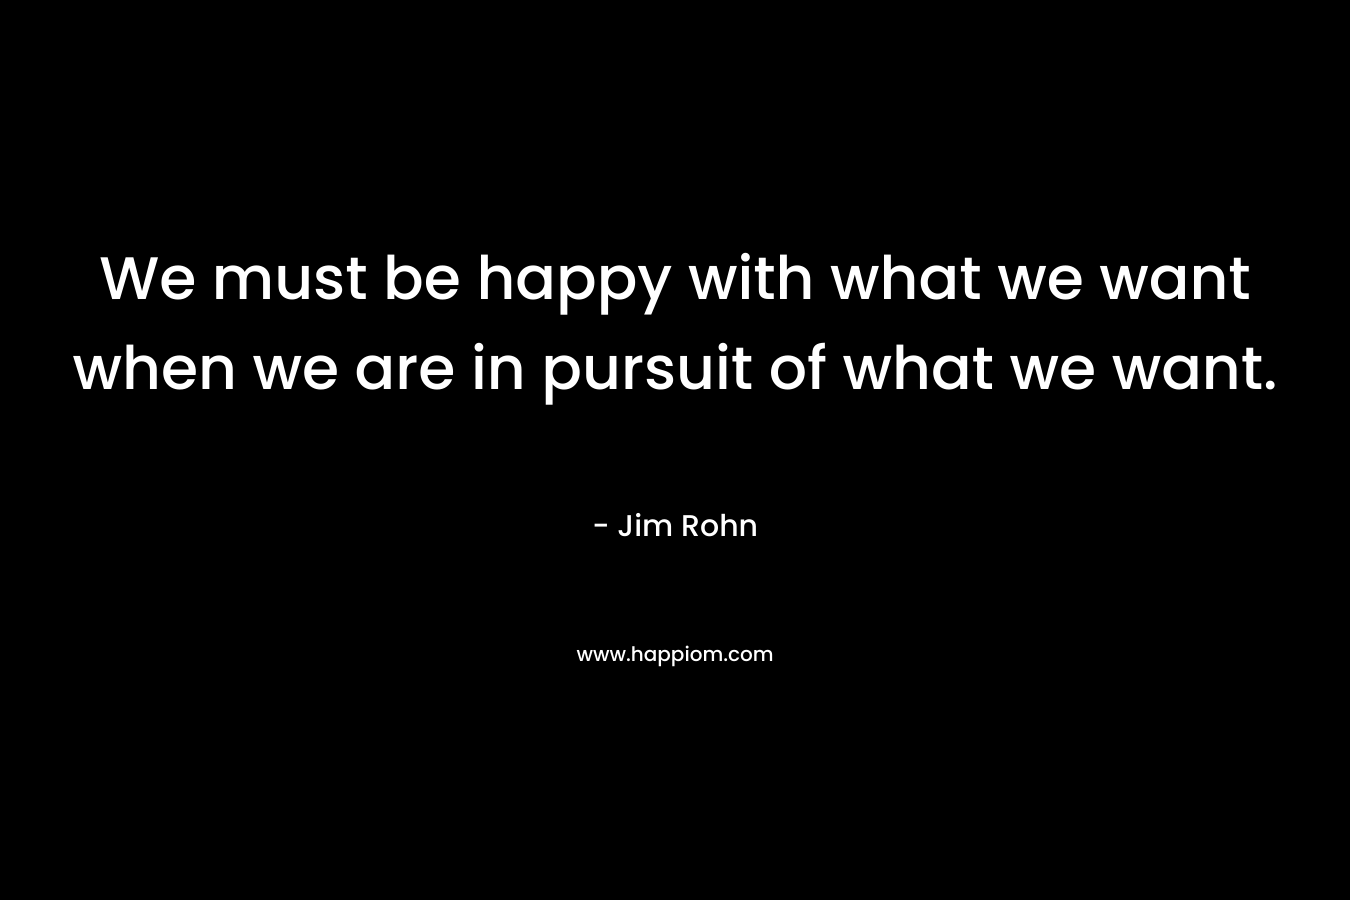 We must be happy with what we want when we are in pursuit of what we want. – Jim Rohn